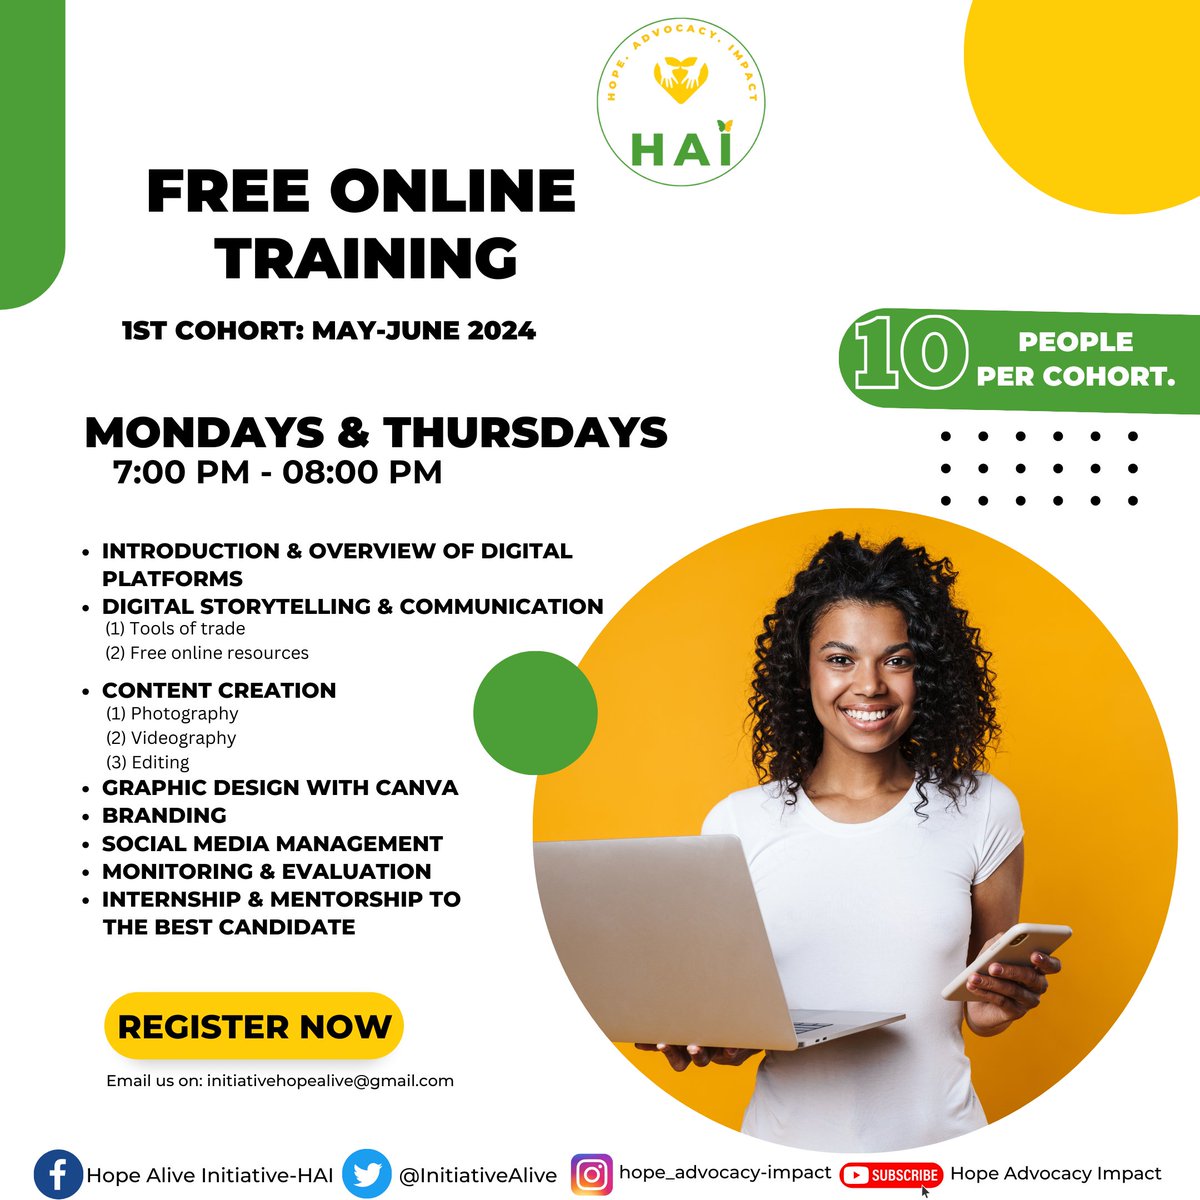 We're offering free online training to equip women & girls, especially those from marginalized communities, with essential digital skills for economic independence. Anyone else interested in mastering digital skills is also welcome. Email us on: initiativehopealive@gmail.com